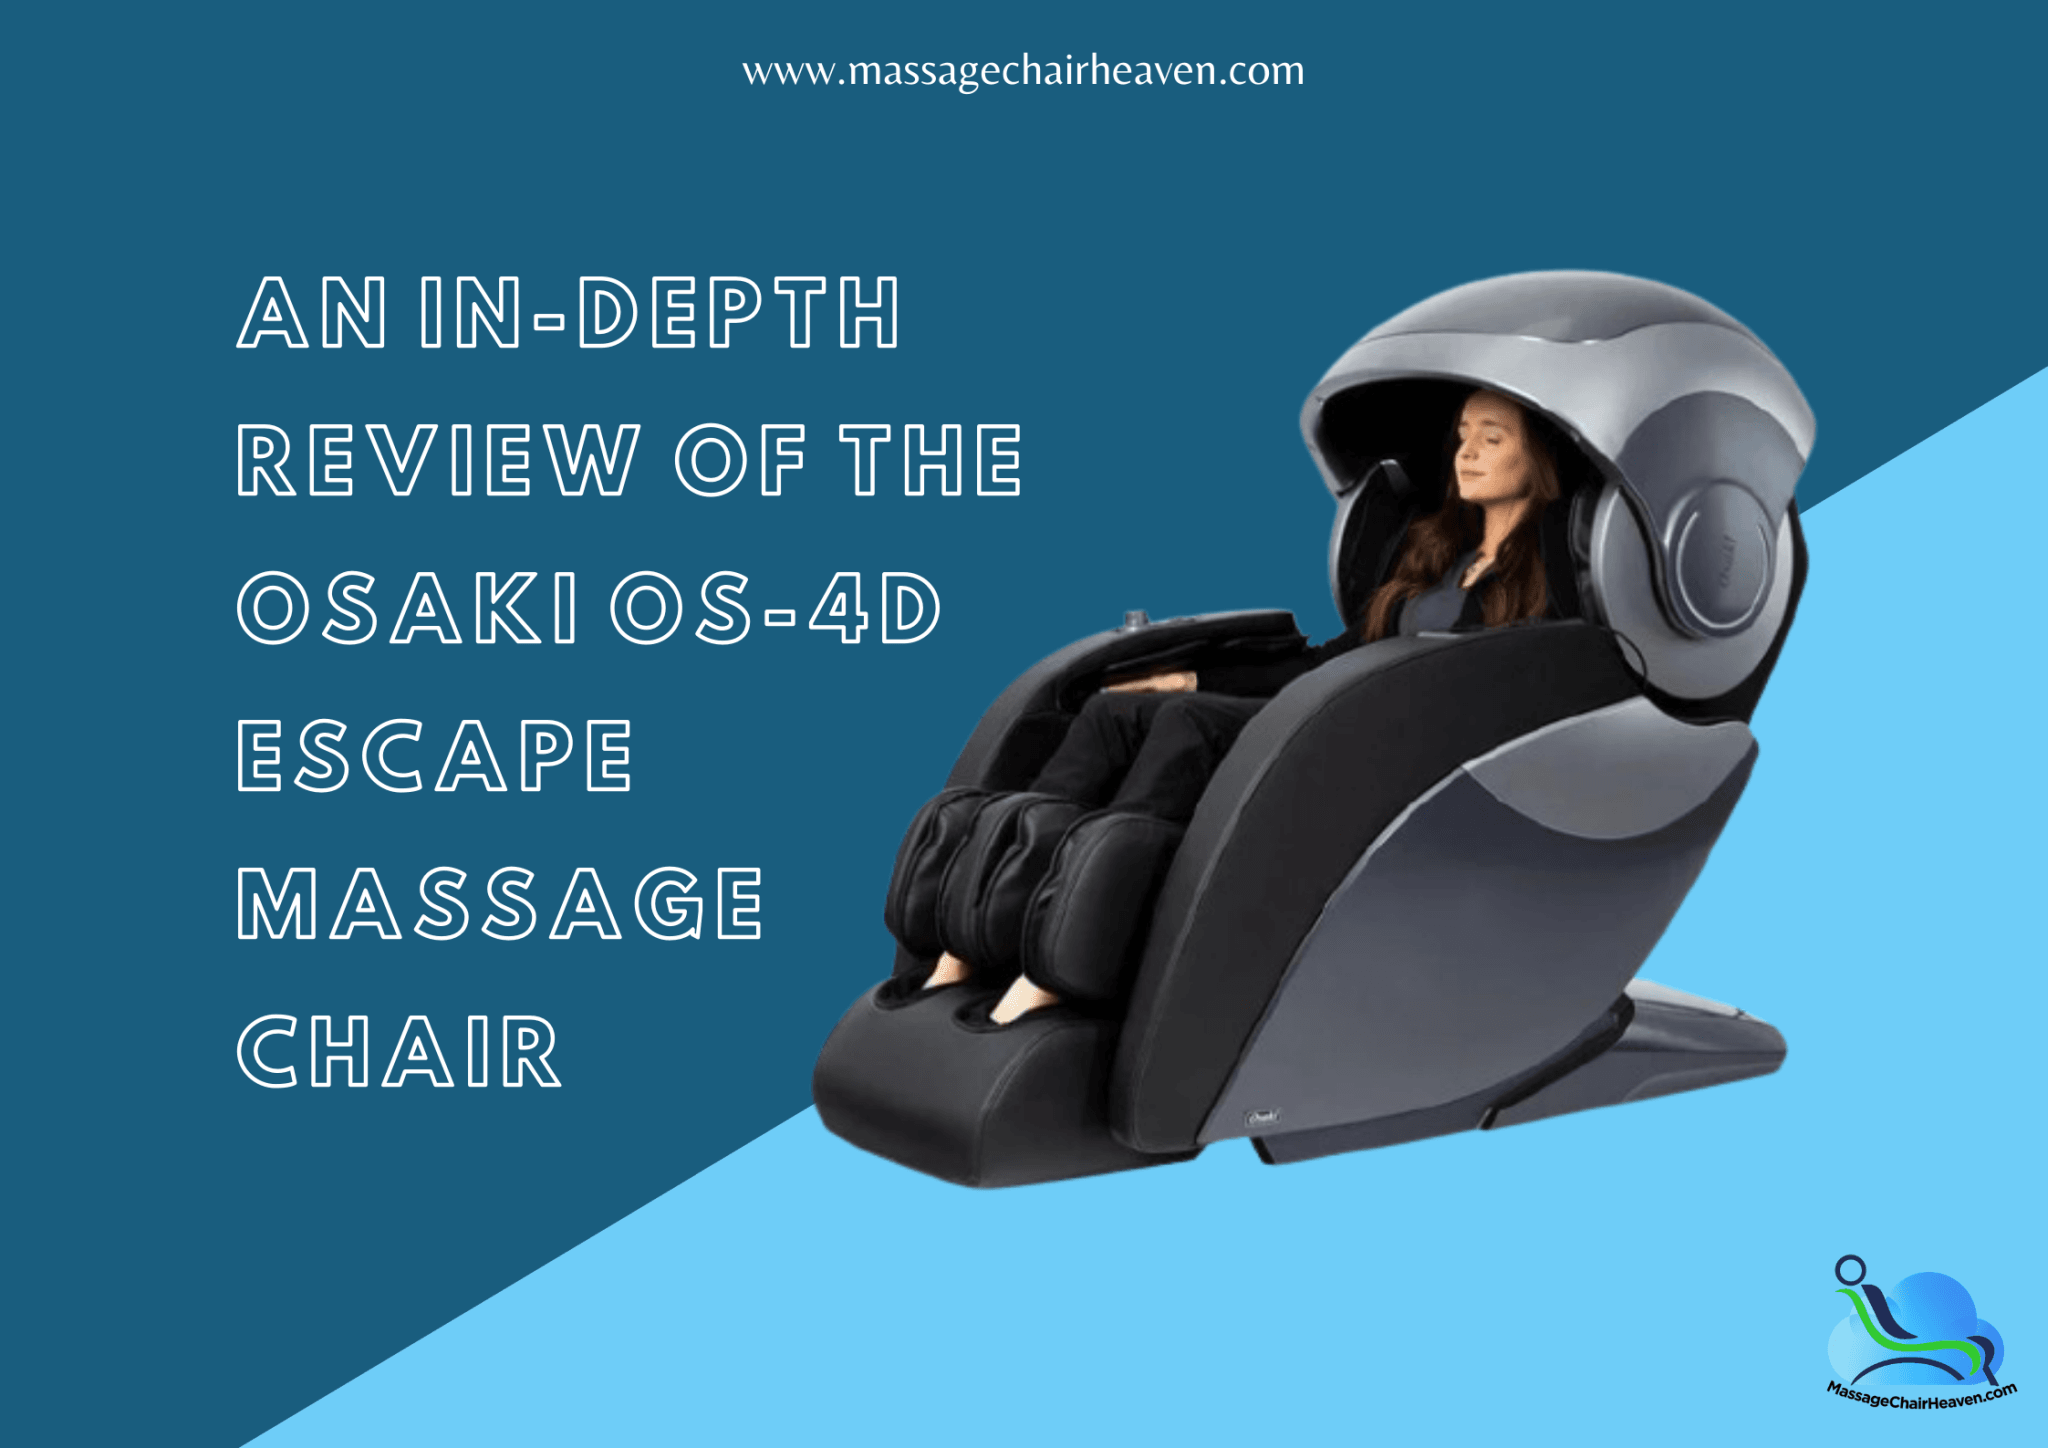 An In-depth Review Of The Osaki OS-4D Escape Massage Chair - Massage Chair Heaven